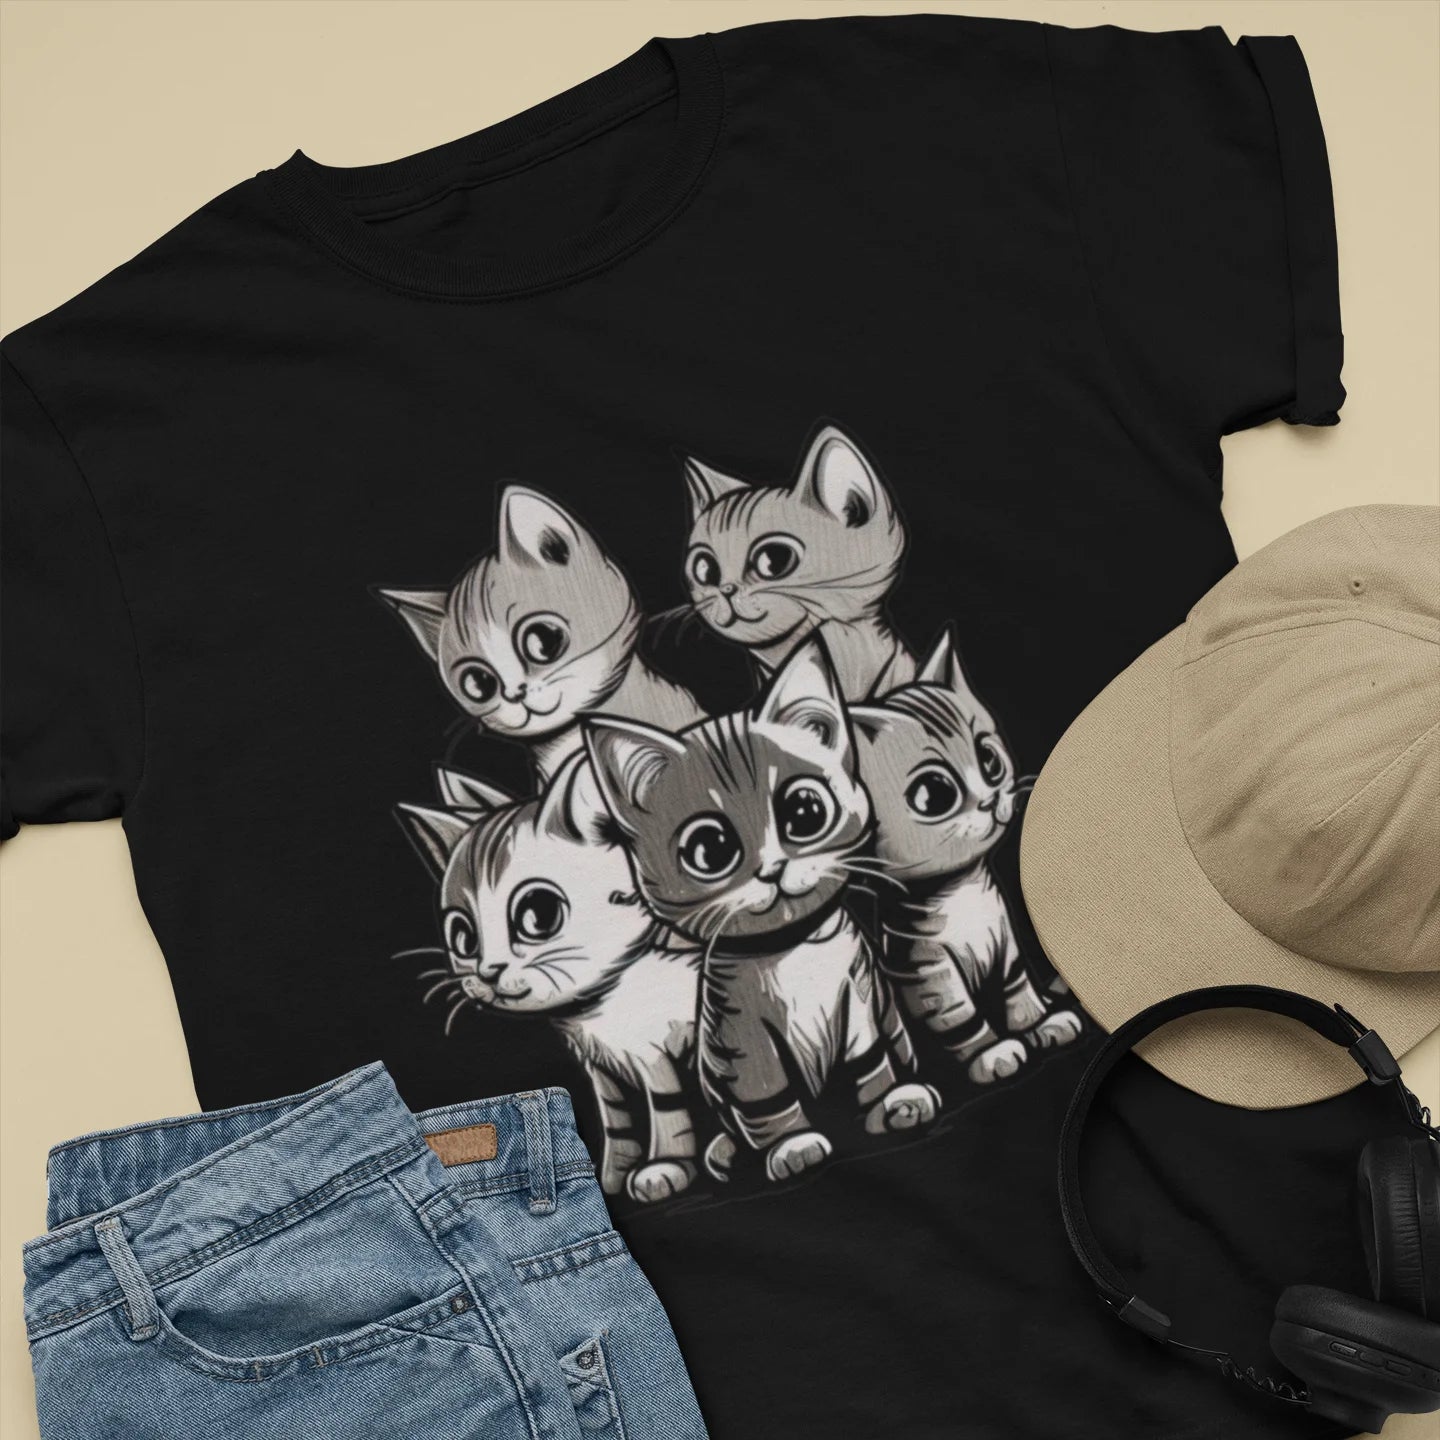 psychedelicBRANDz's Nocturnal Whisker Symphony featuring a group of cats on a black shirt